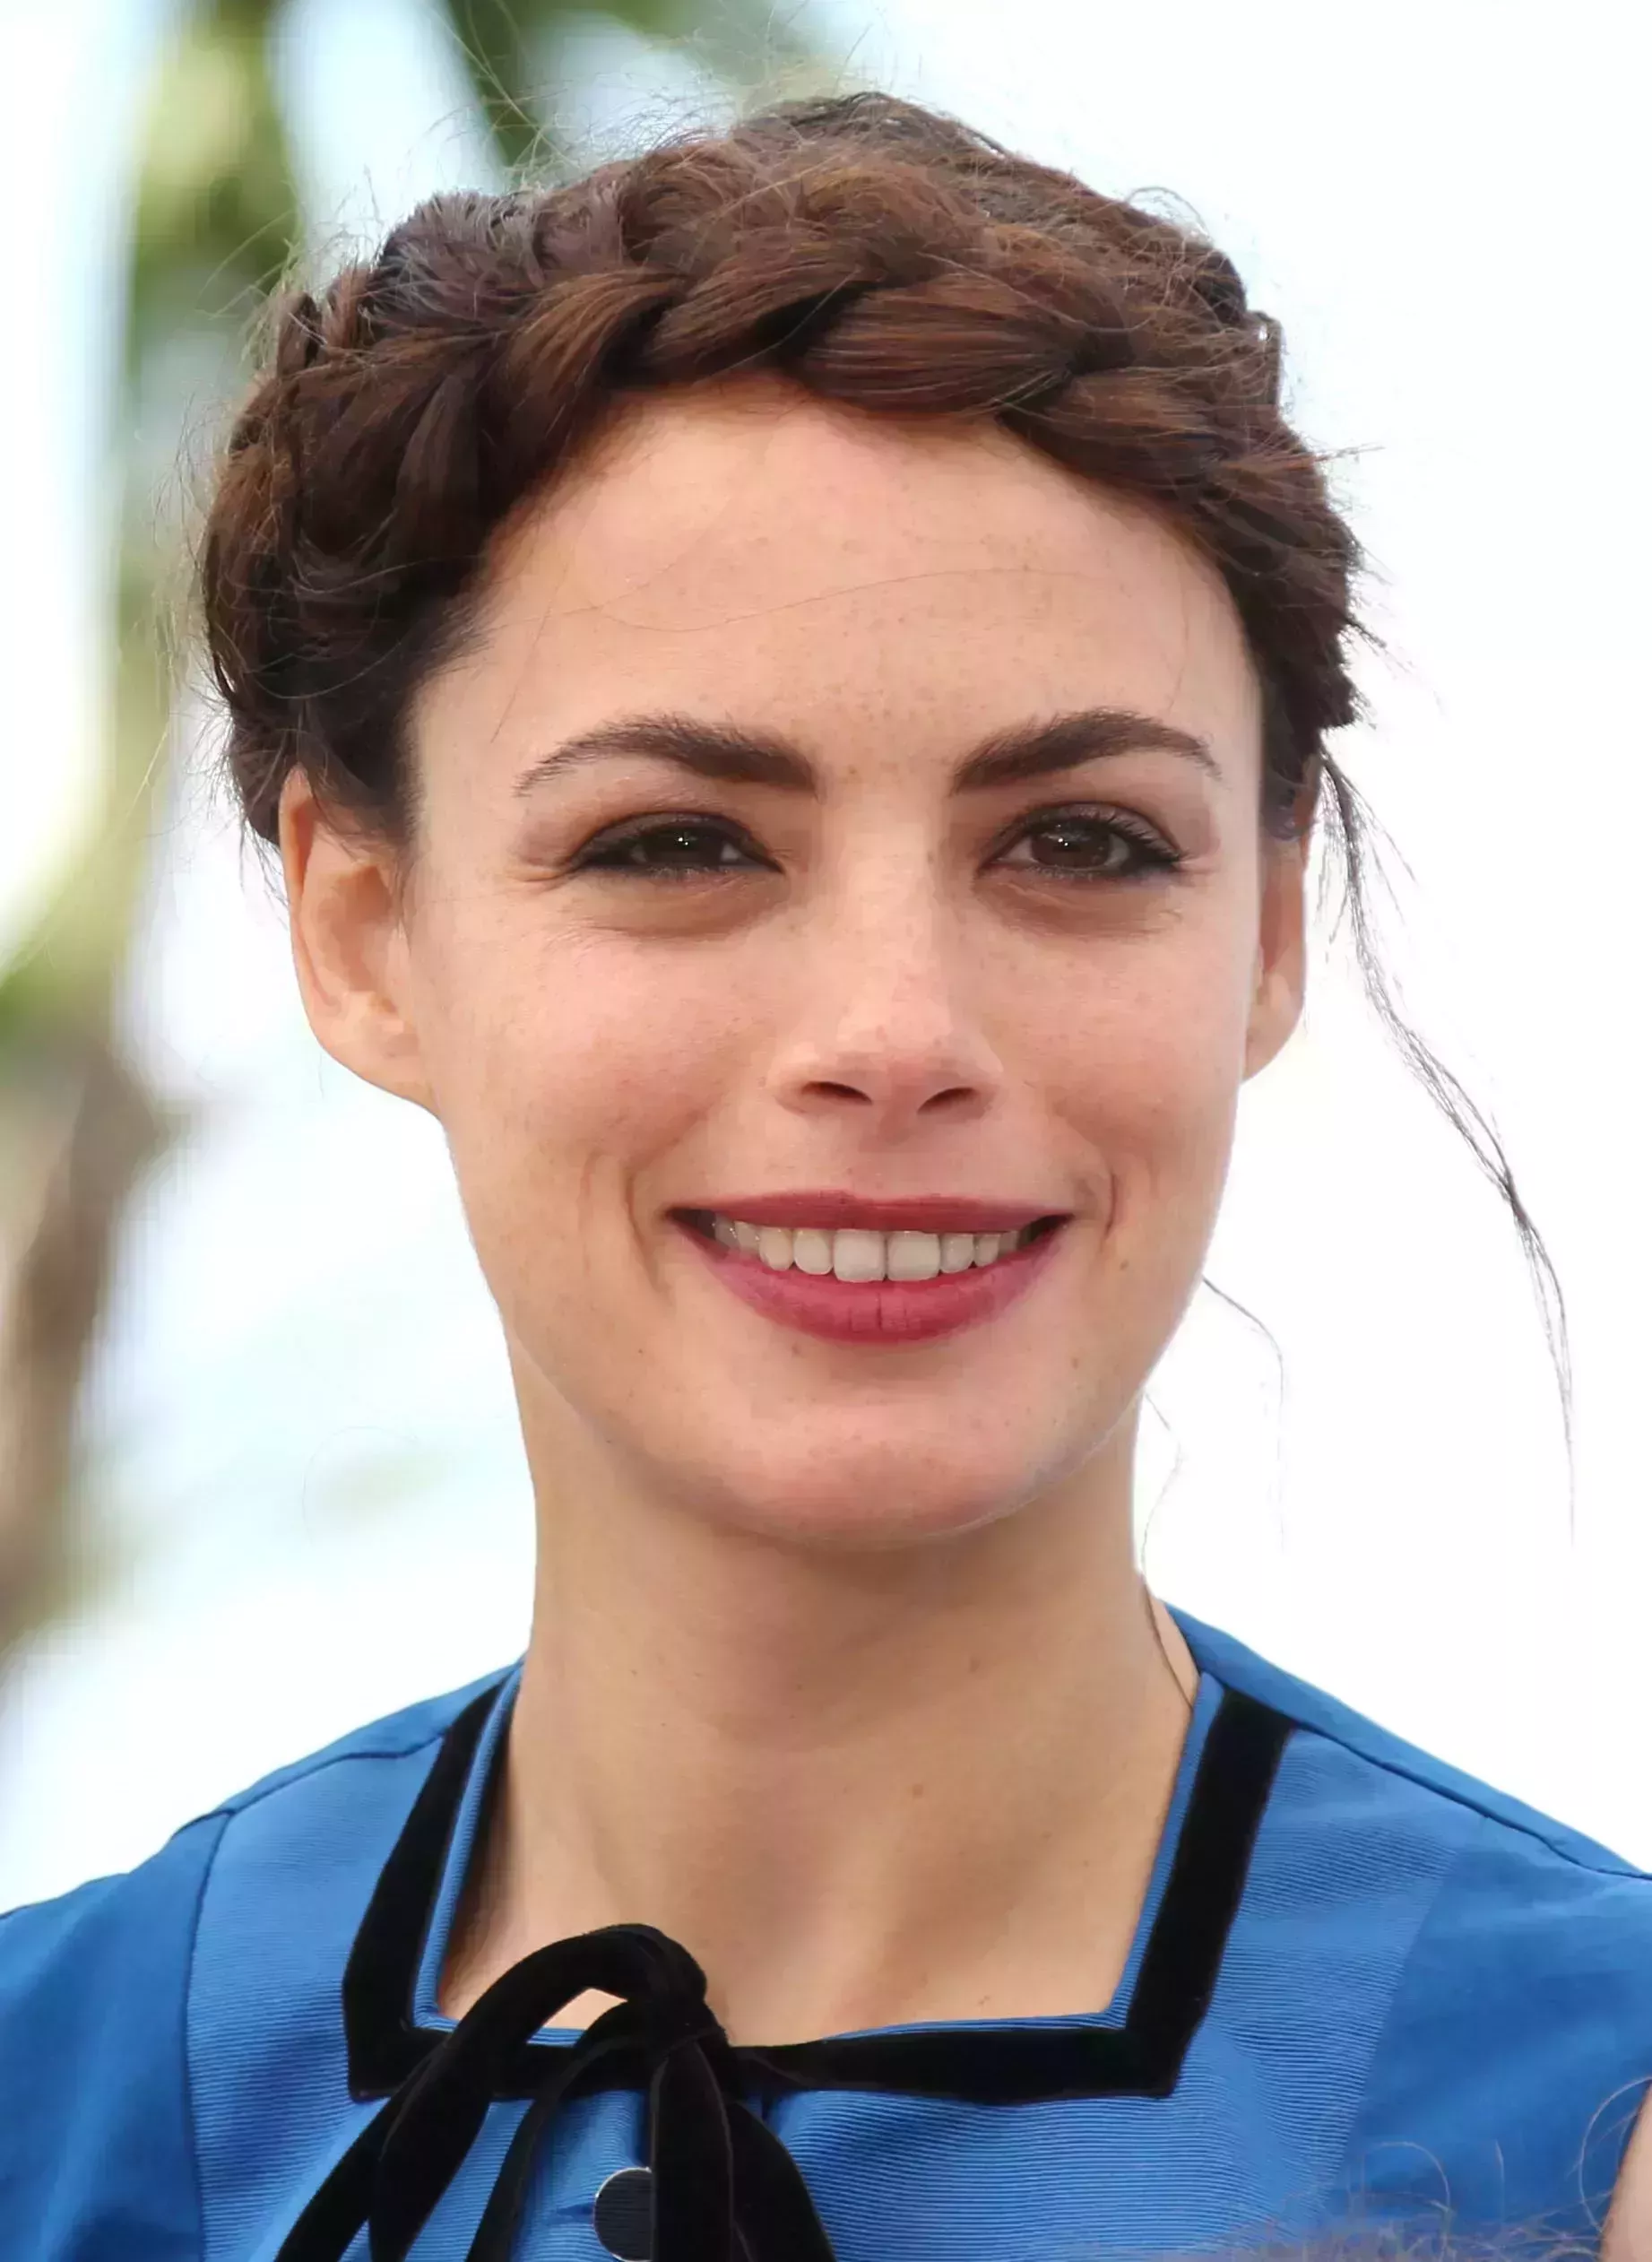 Berenice Bejo with a Forehead Thick Band Braid